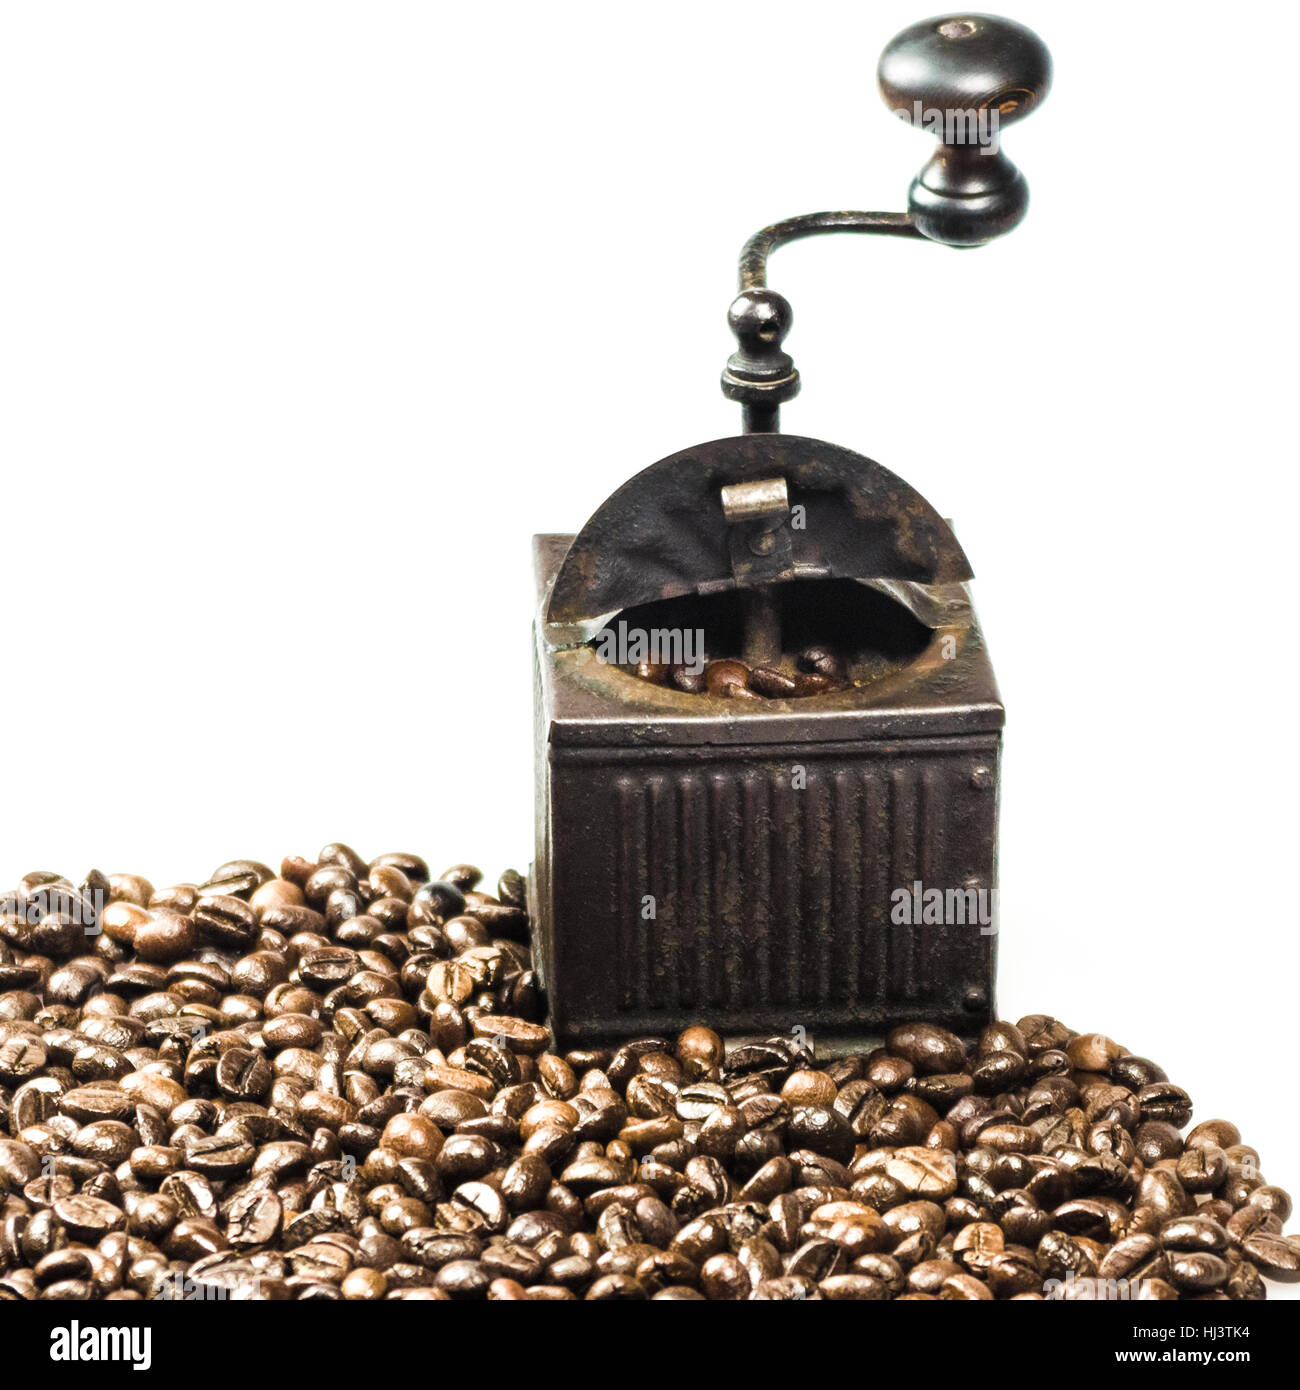 https://c8.alamy.com/comp/HJ3TK4/close-up-of-roasted-coffee-beans-isolated-on-white-background-and-HJ3TK4.jpg